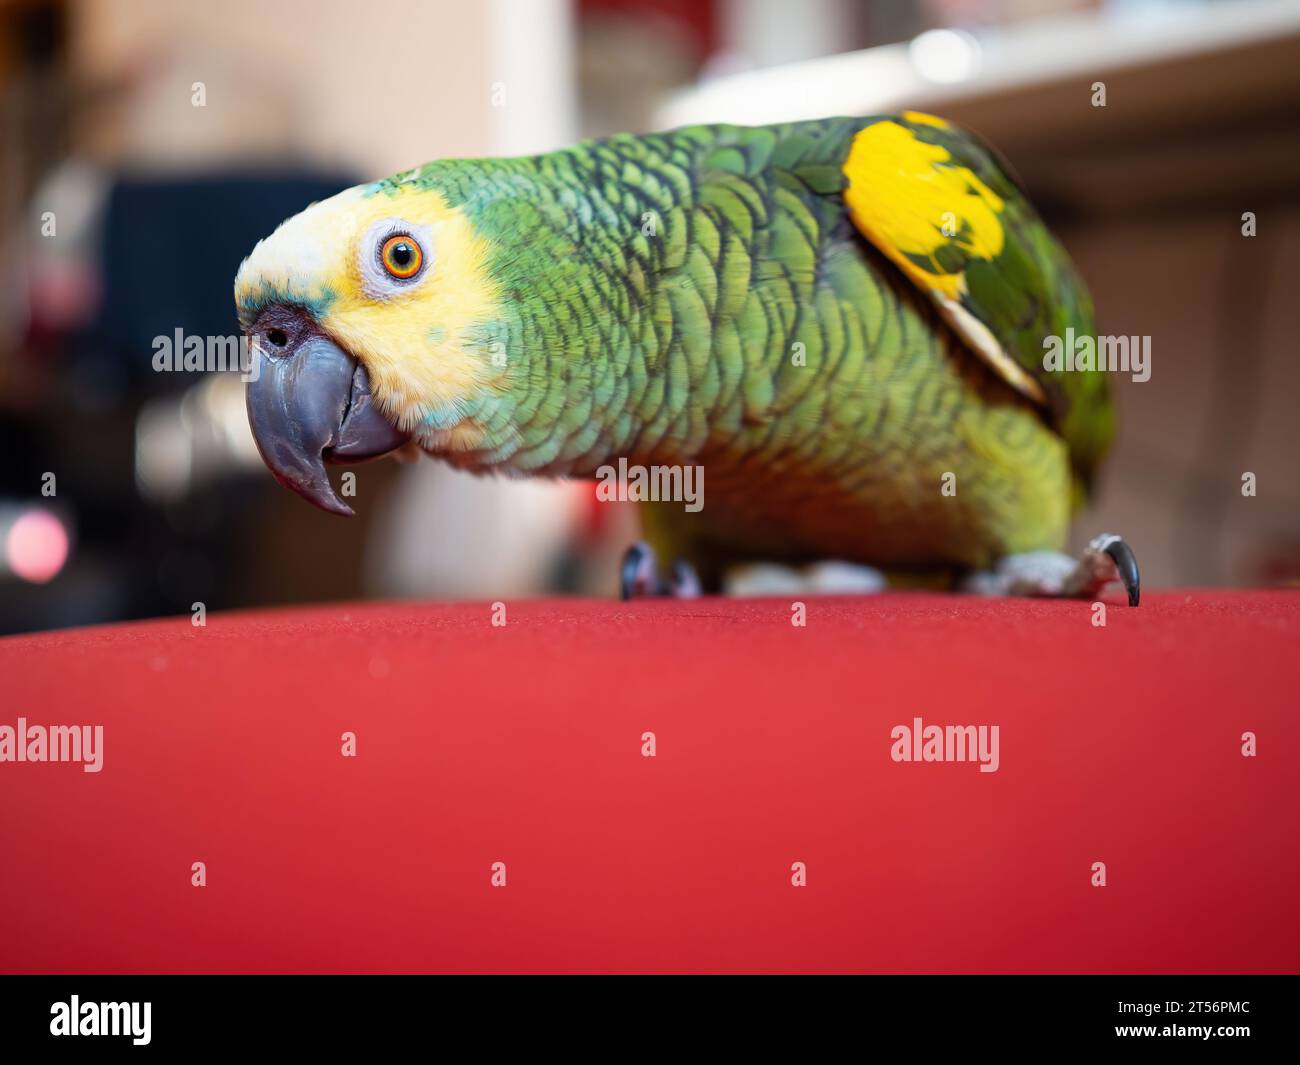 Turquoise-fronted amazon parrot (Amazona aestiva) enjoys free movement around the apartment. Cute green friendly pet bird on red couch. Close-up. Stock Photo